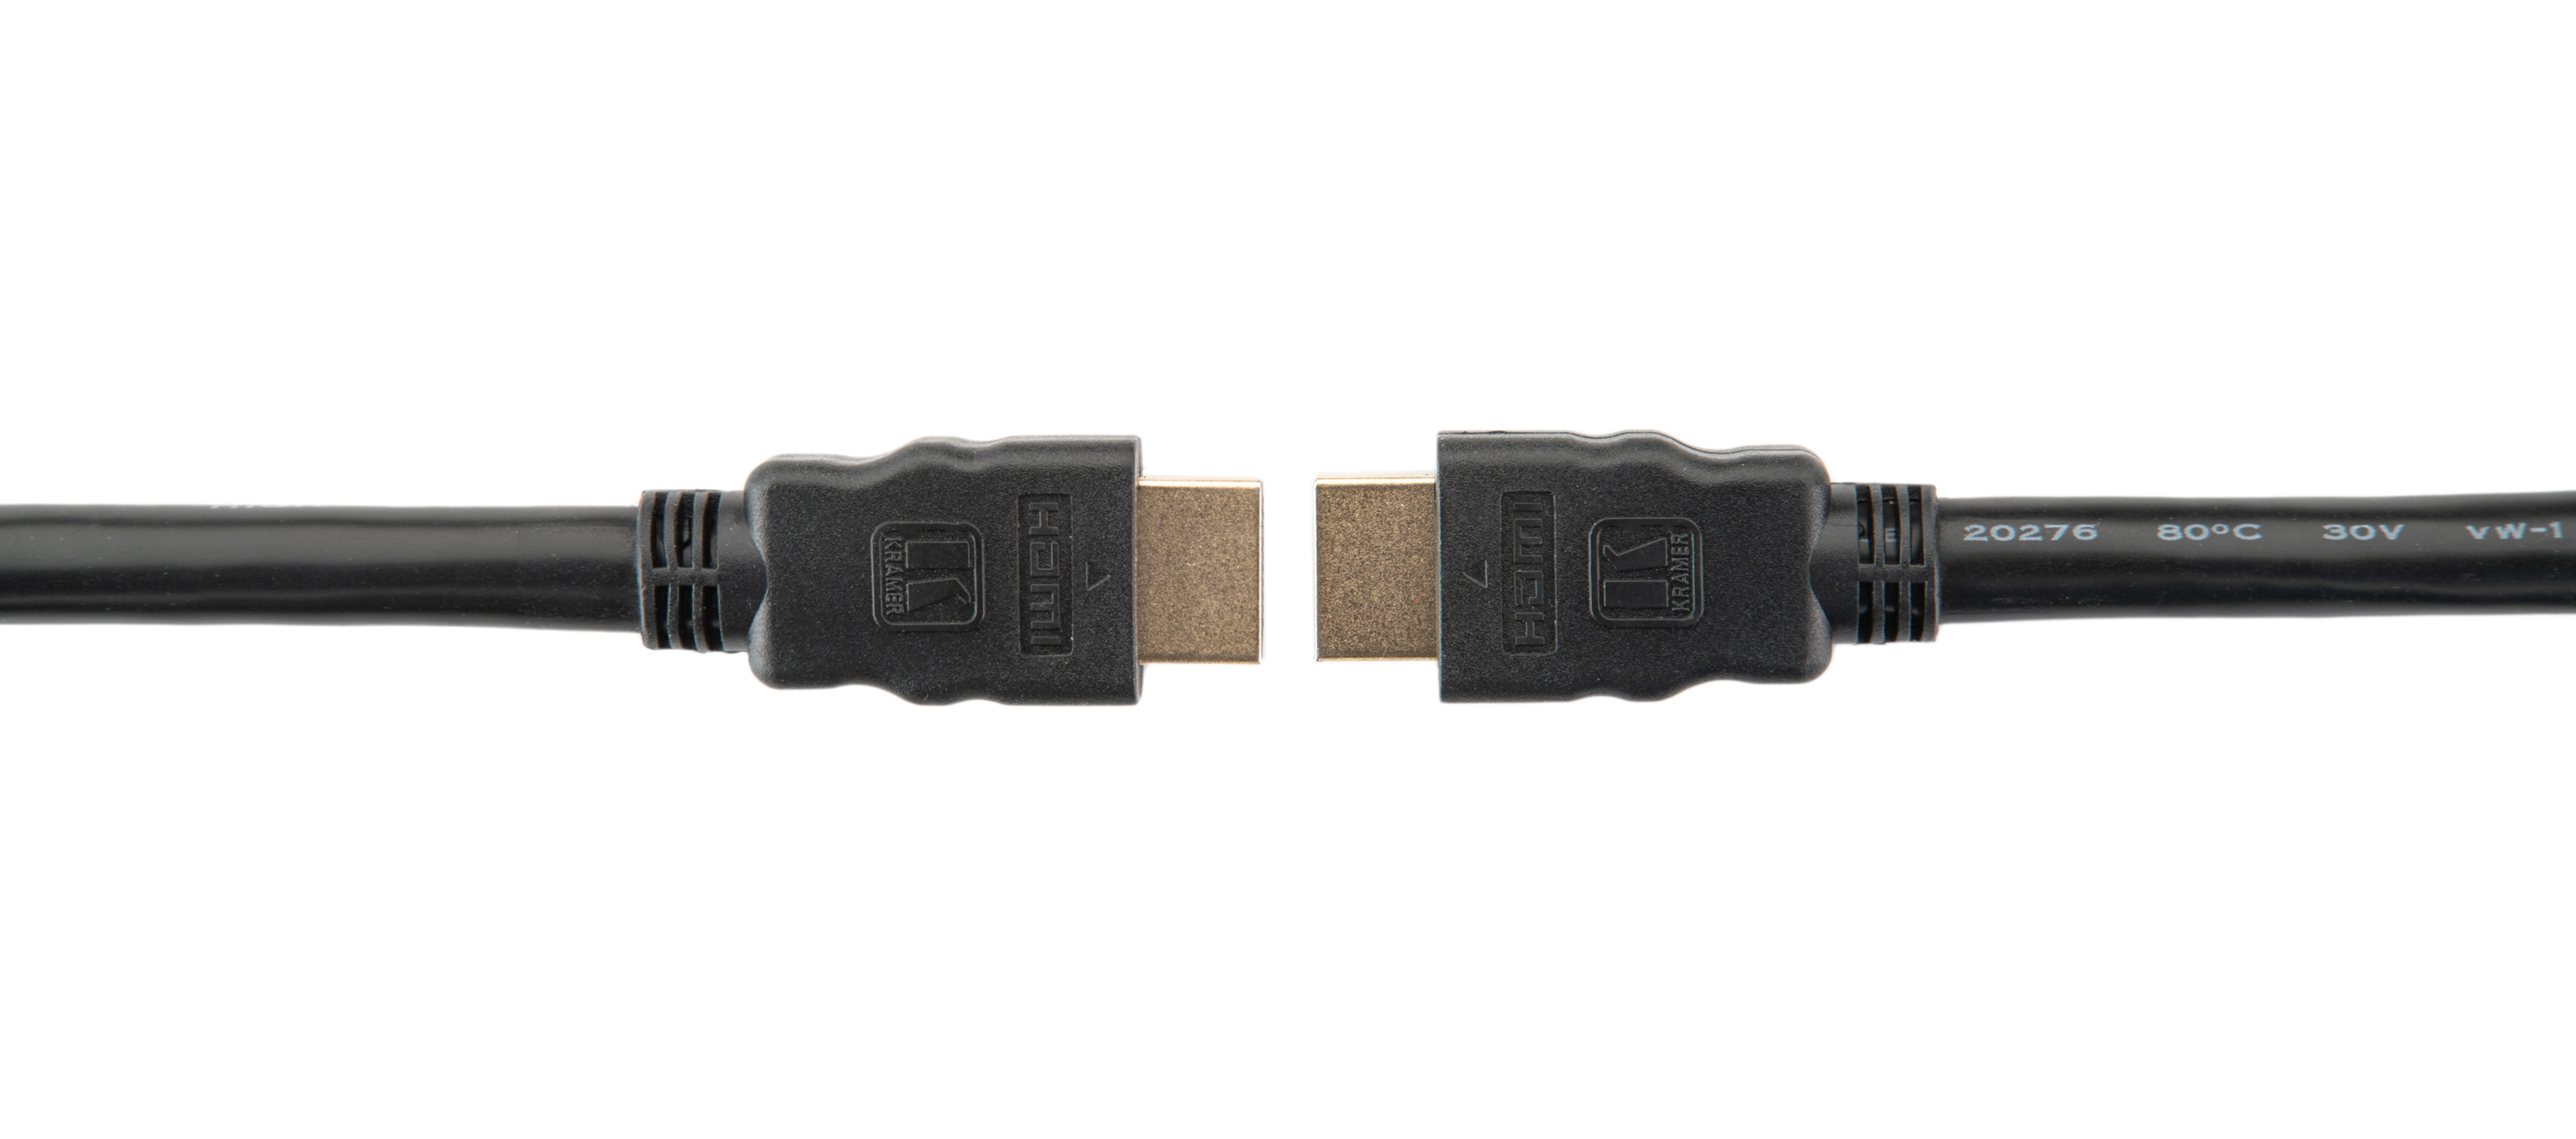 C-HM/ETH-50 High–Speed HDMI Cable with Ethernet - 50'